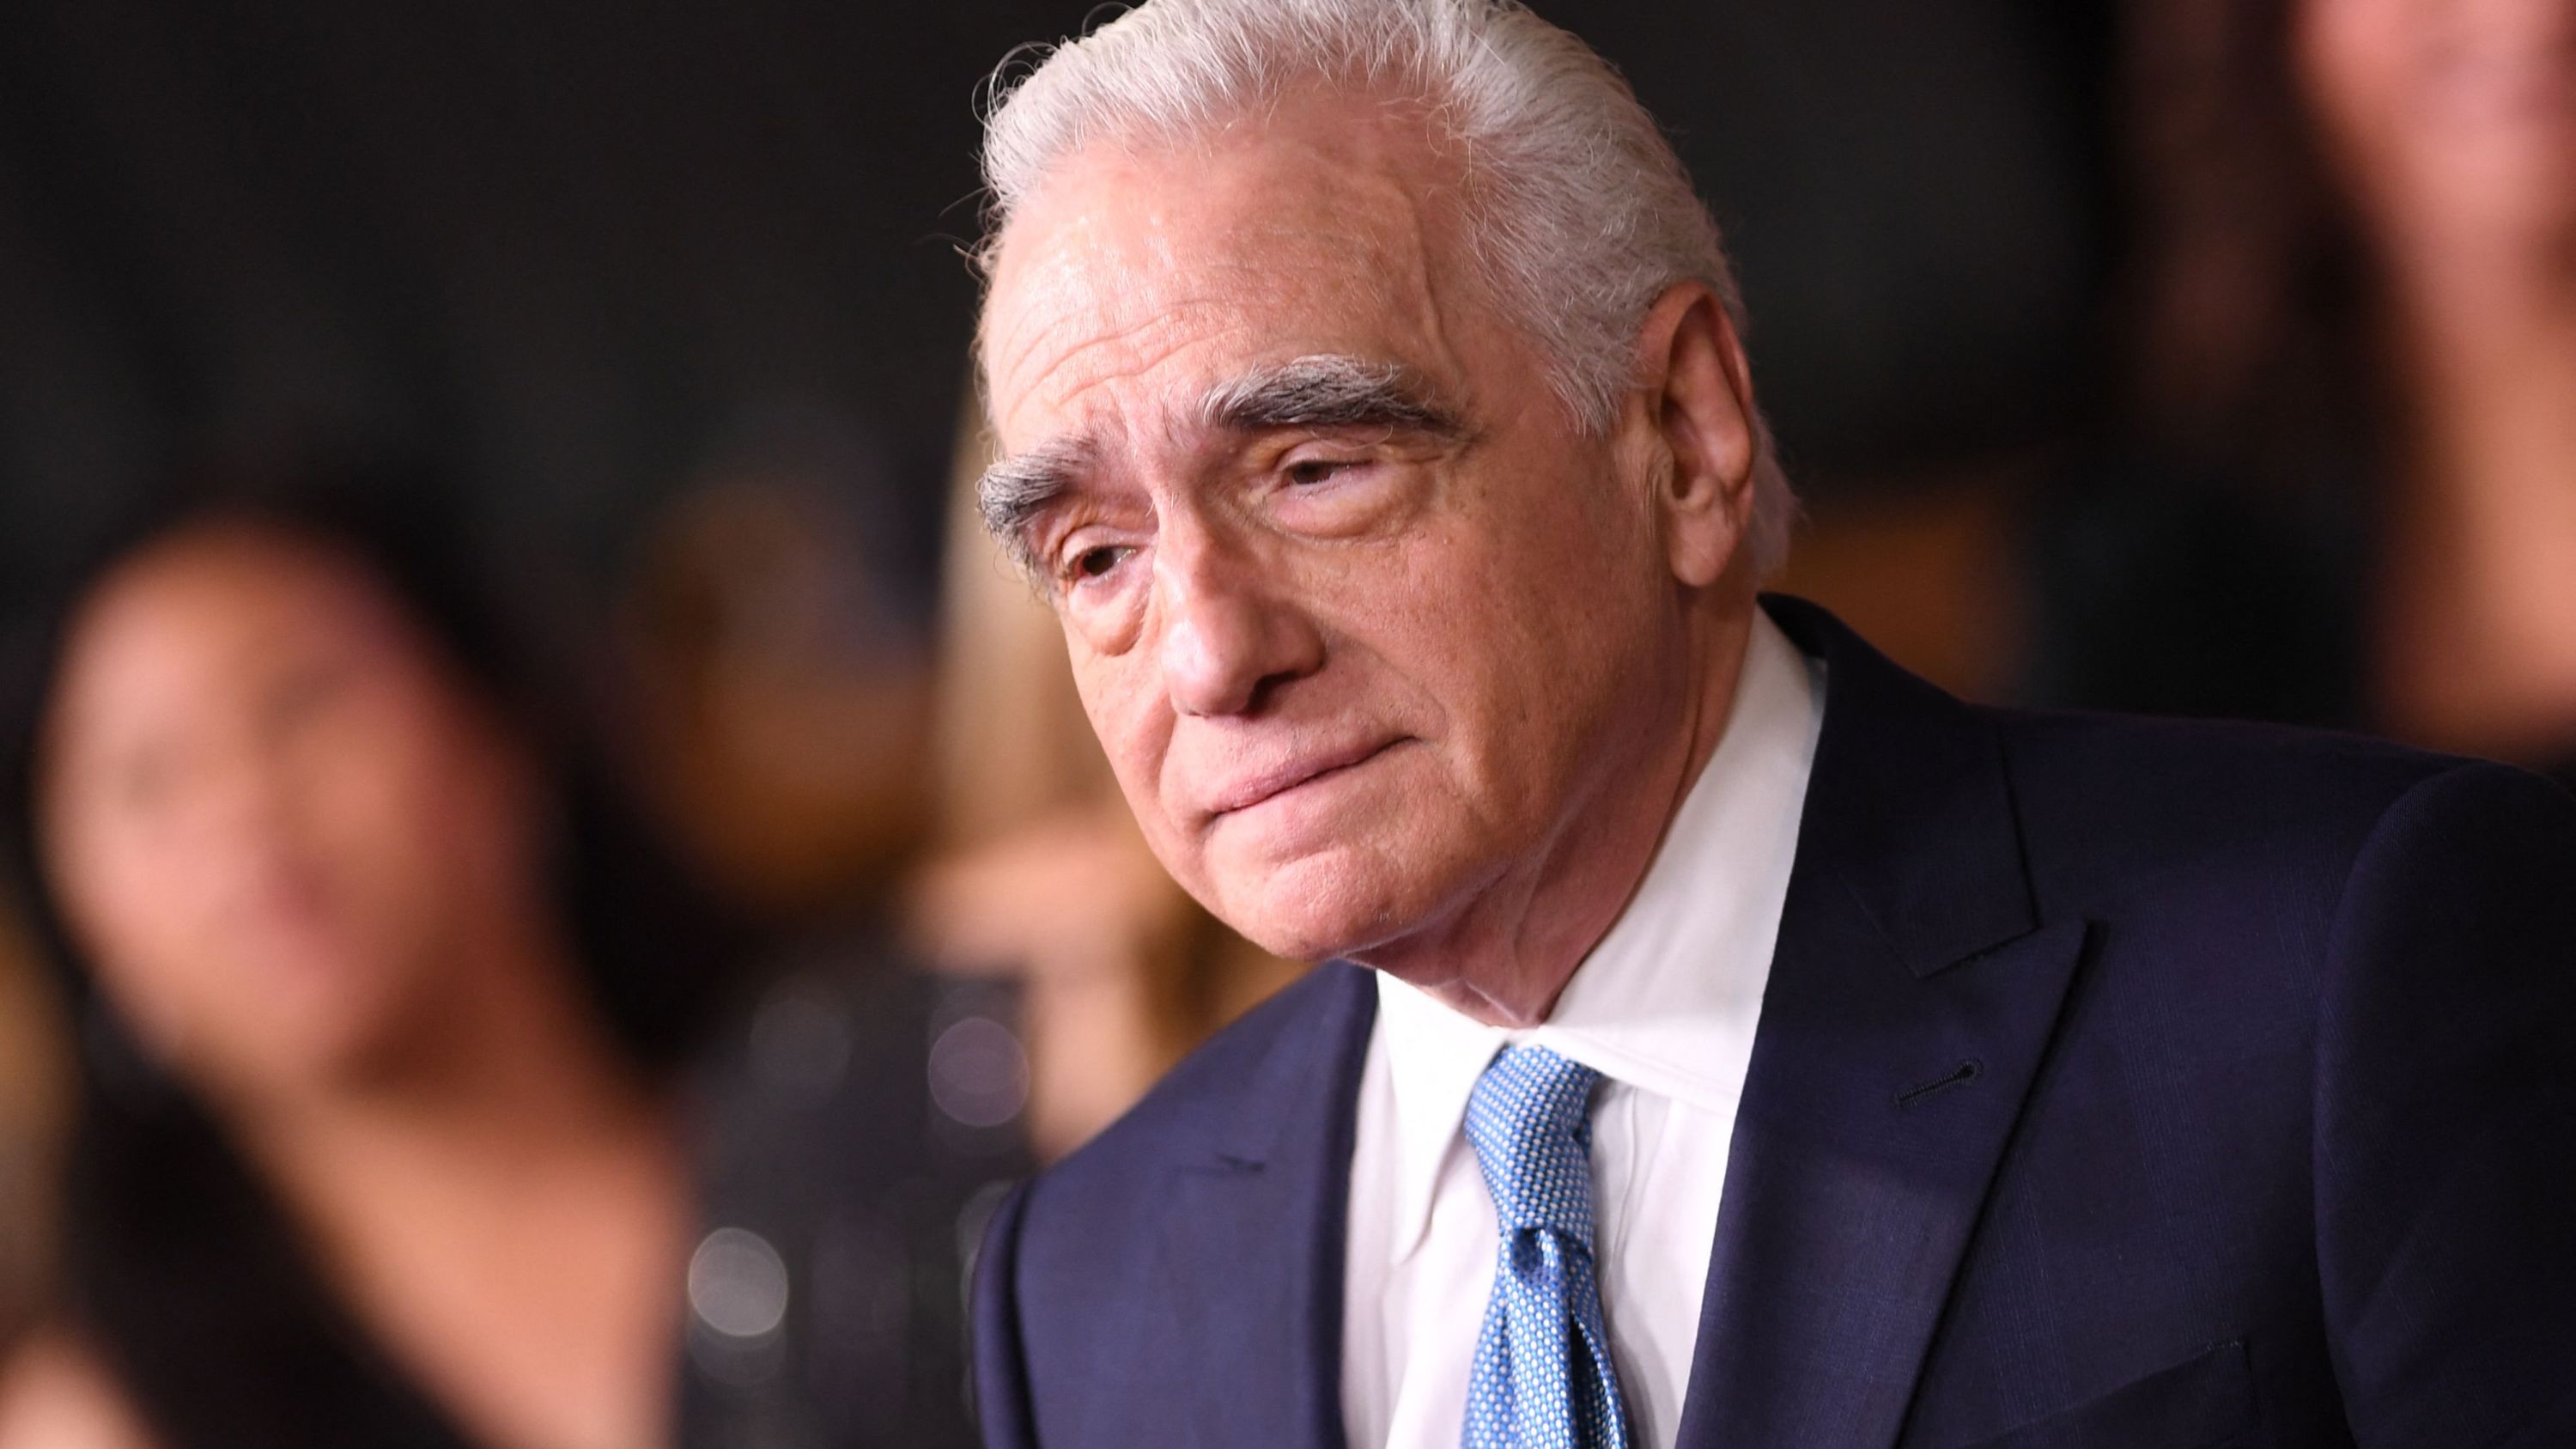 US-Italian filmmaker Martin Scorsese arrives for the Los Angeles premiere of Netflix's "The Irishman" at the Chinese theatre in Hollywood on October 24, 2019.